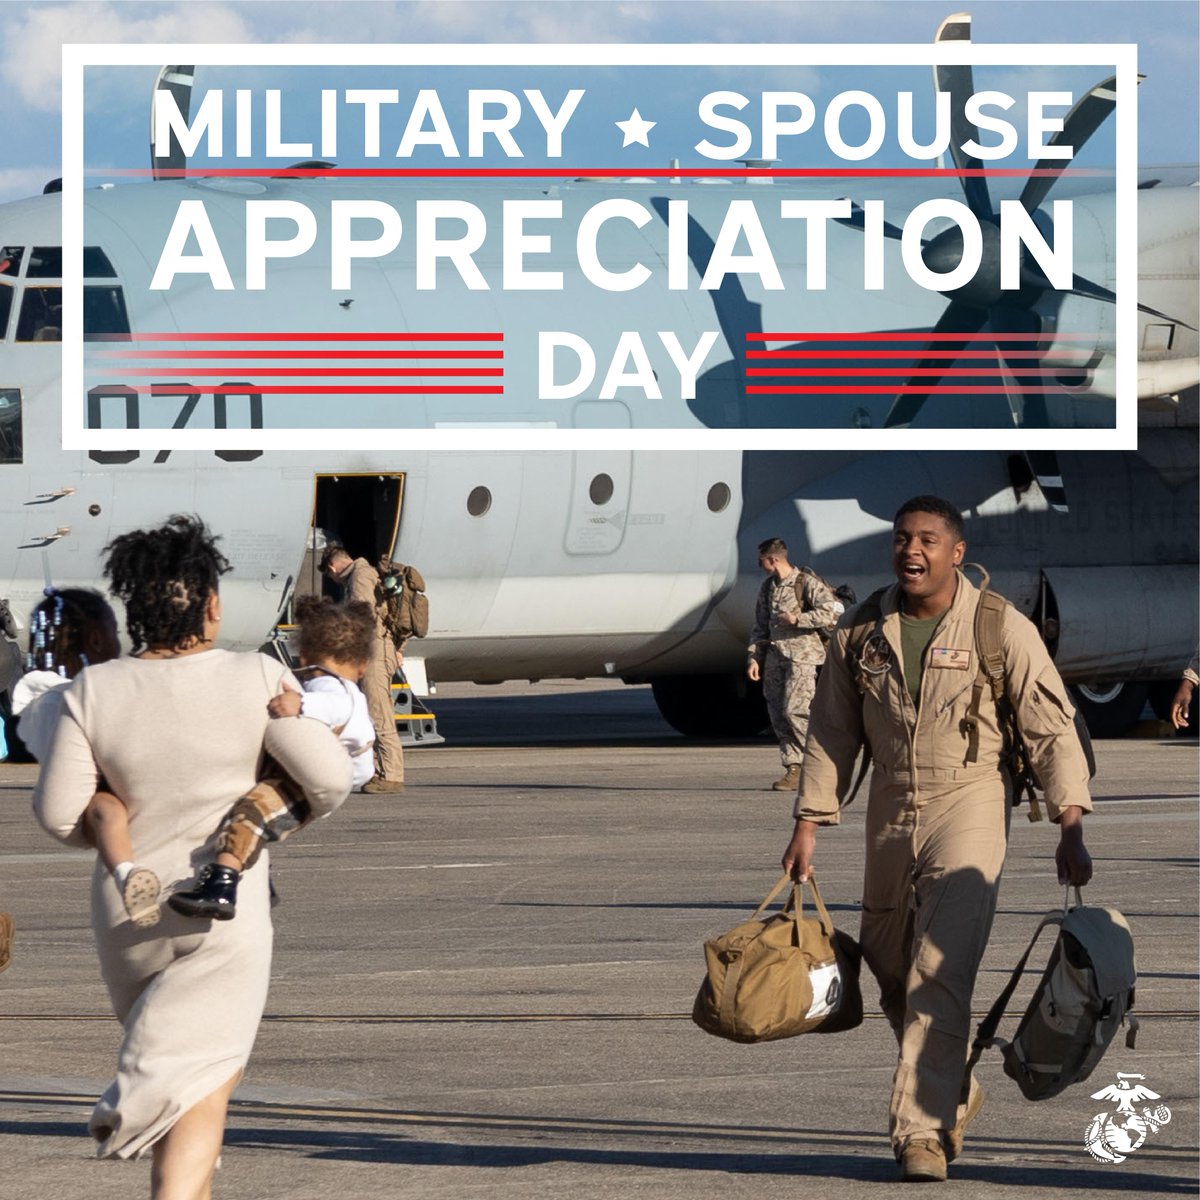 #OTD, we celebrate #MilitarySpouseAppreciationDay, recognizing our military spouses and their selfless dedication and support for our Marines. Whether Marines are deployed overseas or at home in garrison, we rely on the support of those we love to be able to focus on the mission.